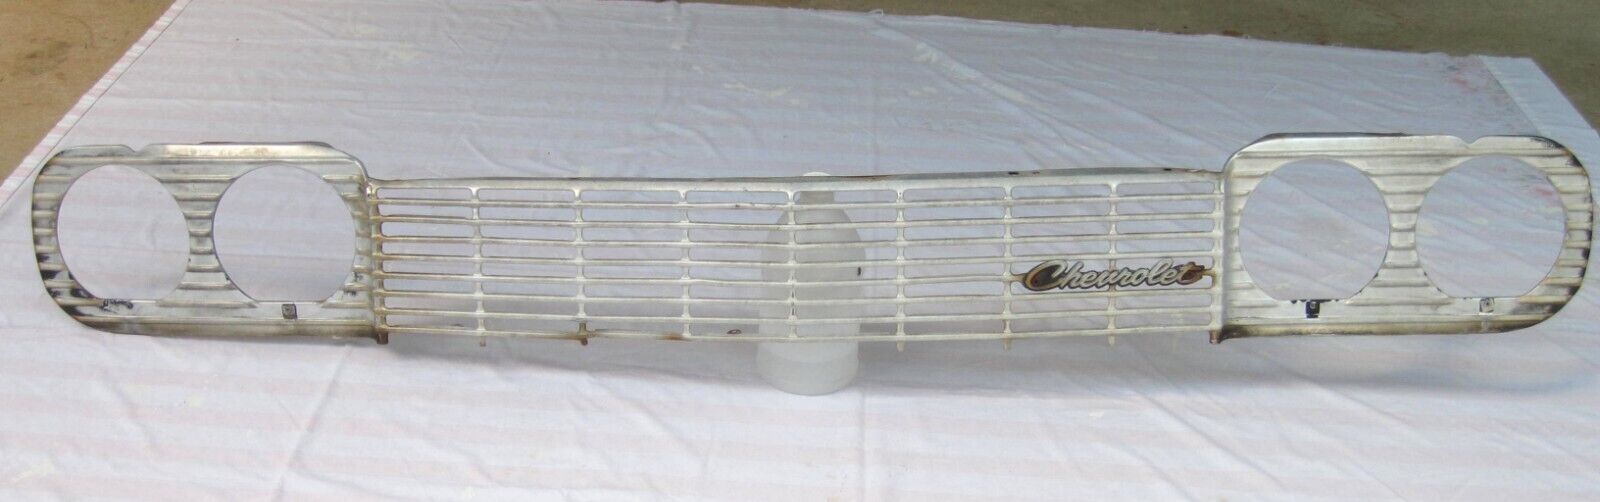 1964 Chevrolet impala grill chevy 64 biscayne bel air - £189.92 GBP